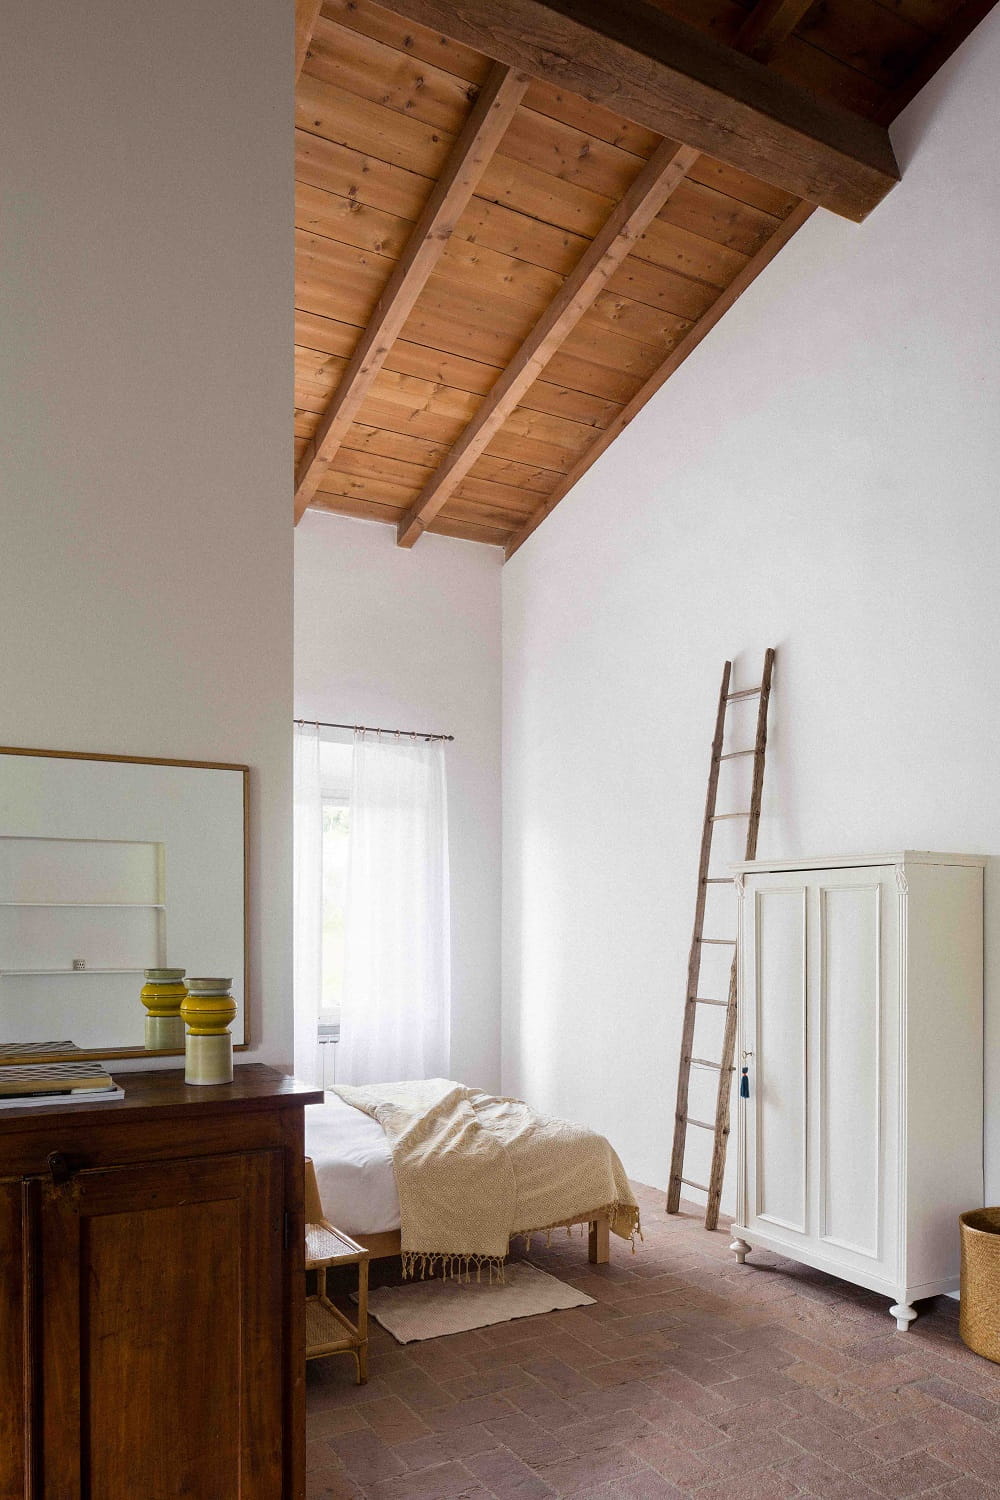 Villa Lena Agriturismo in Tuscany styled by Clarisse Demory